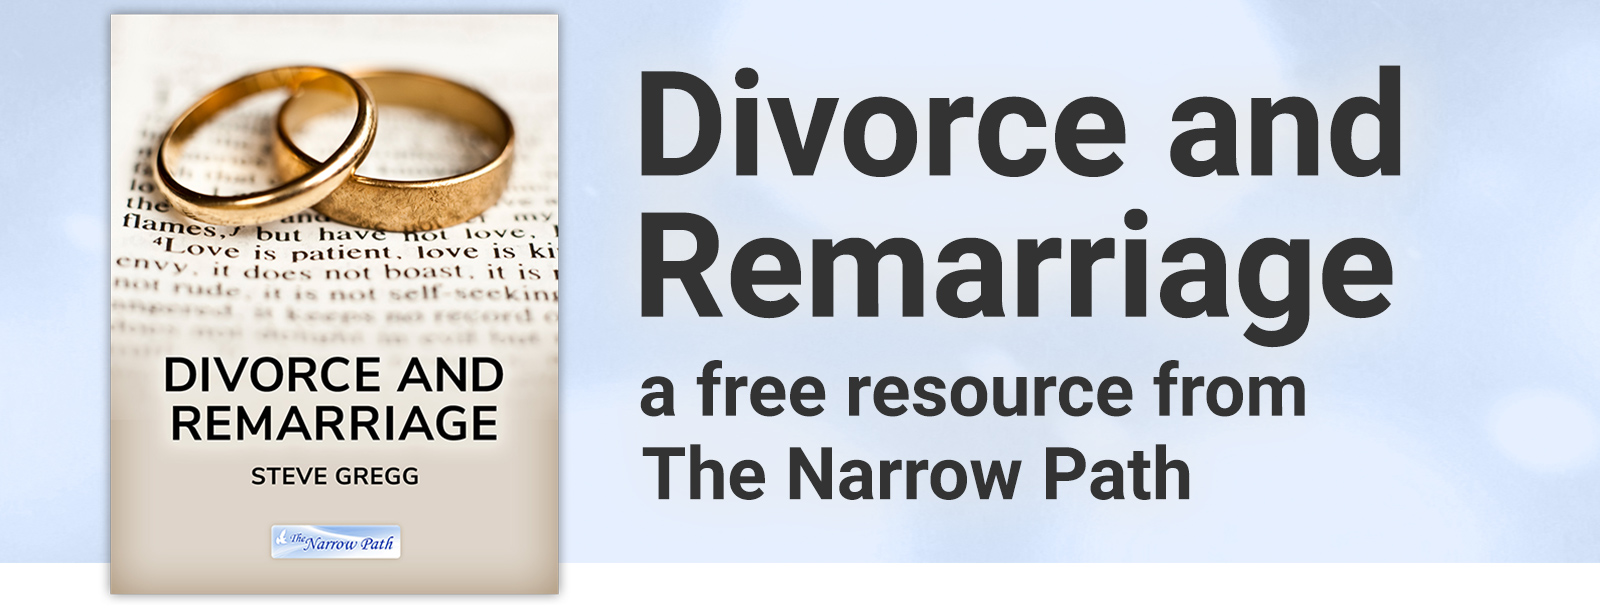 'Divorce and Remarriage' is a free resource from The Narrow Path